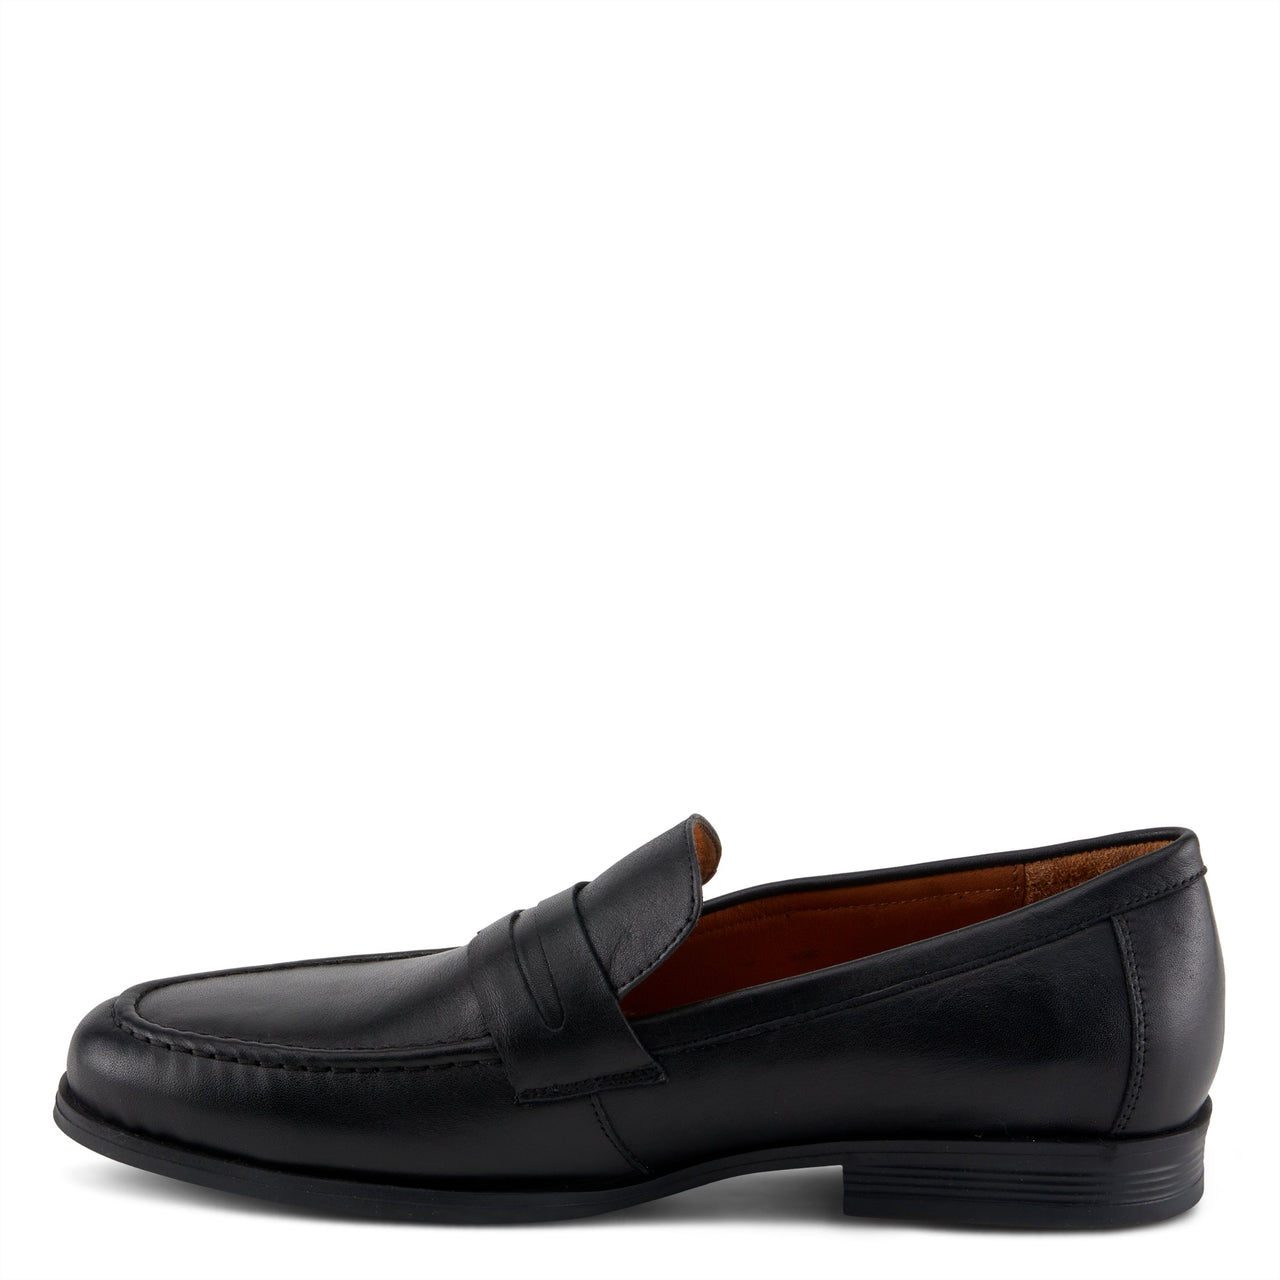 
Spring Step Men Paul Shoes sophisticated and stylish footwear choice for men